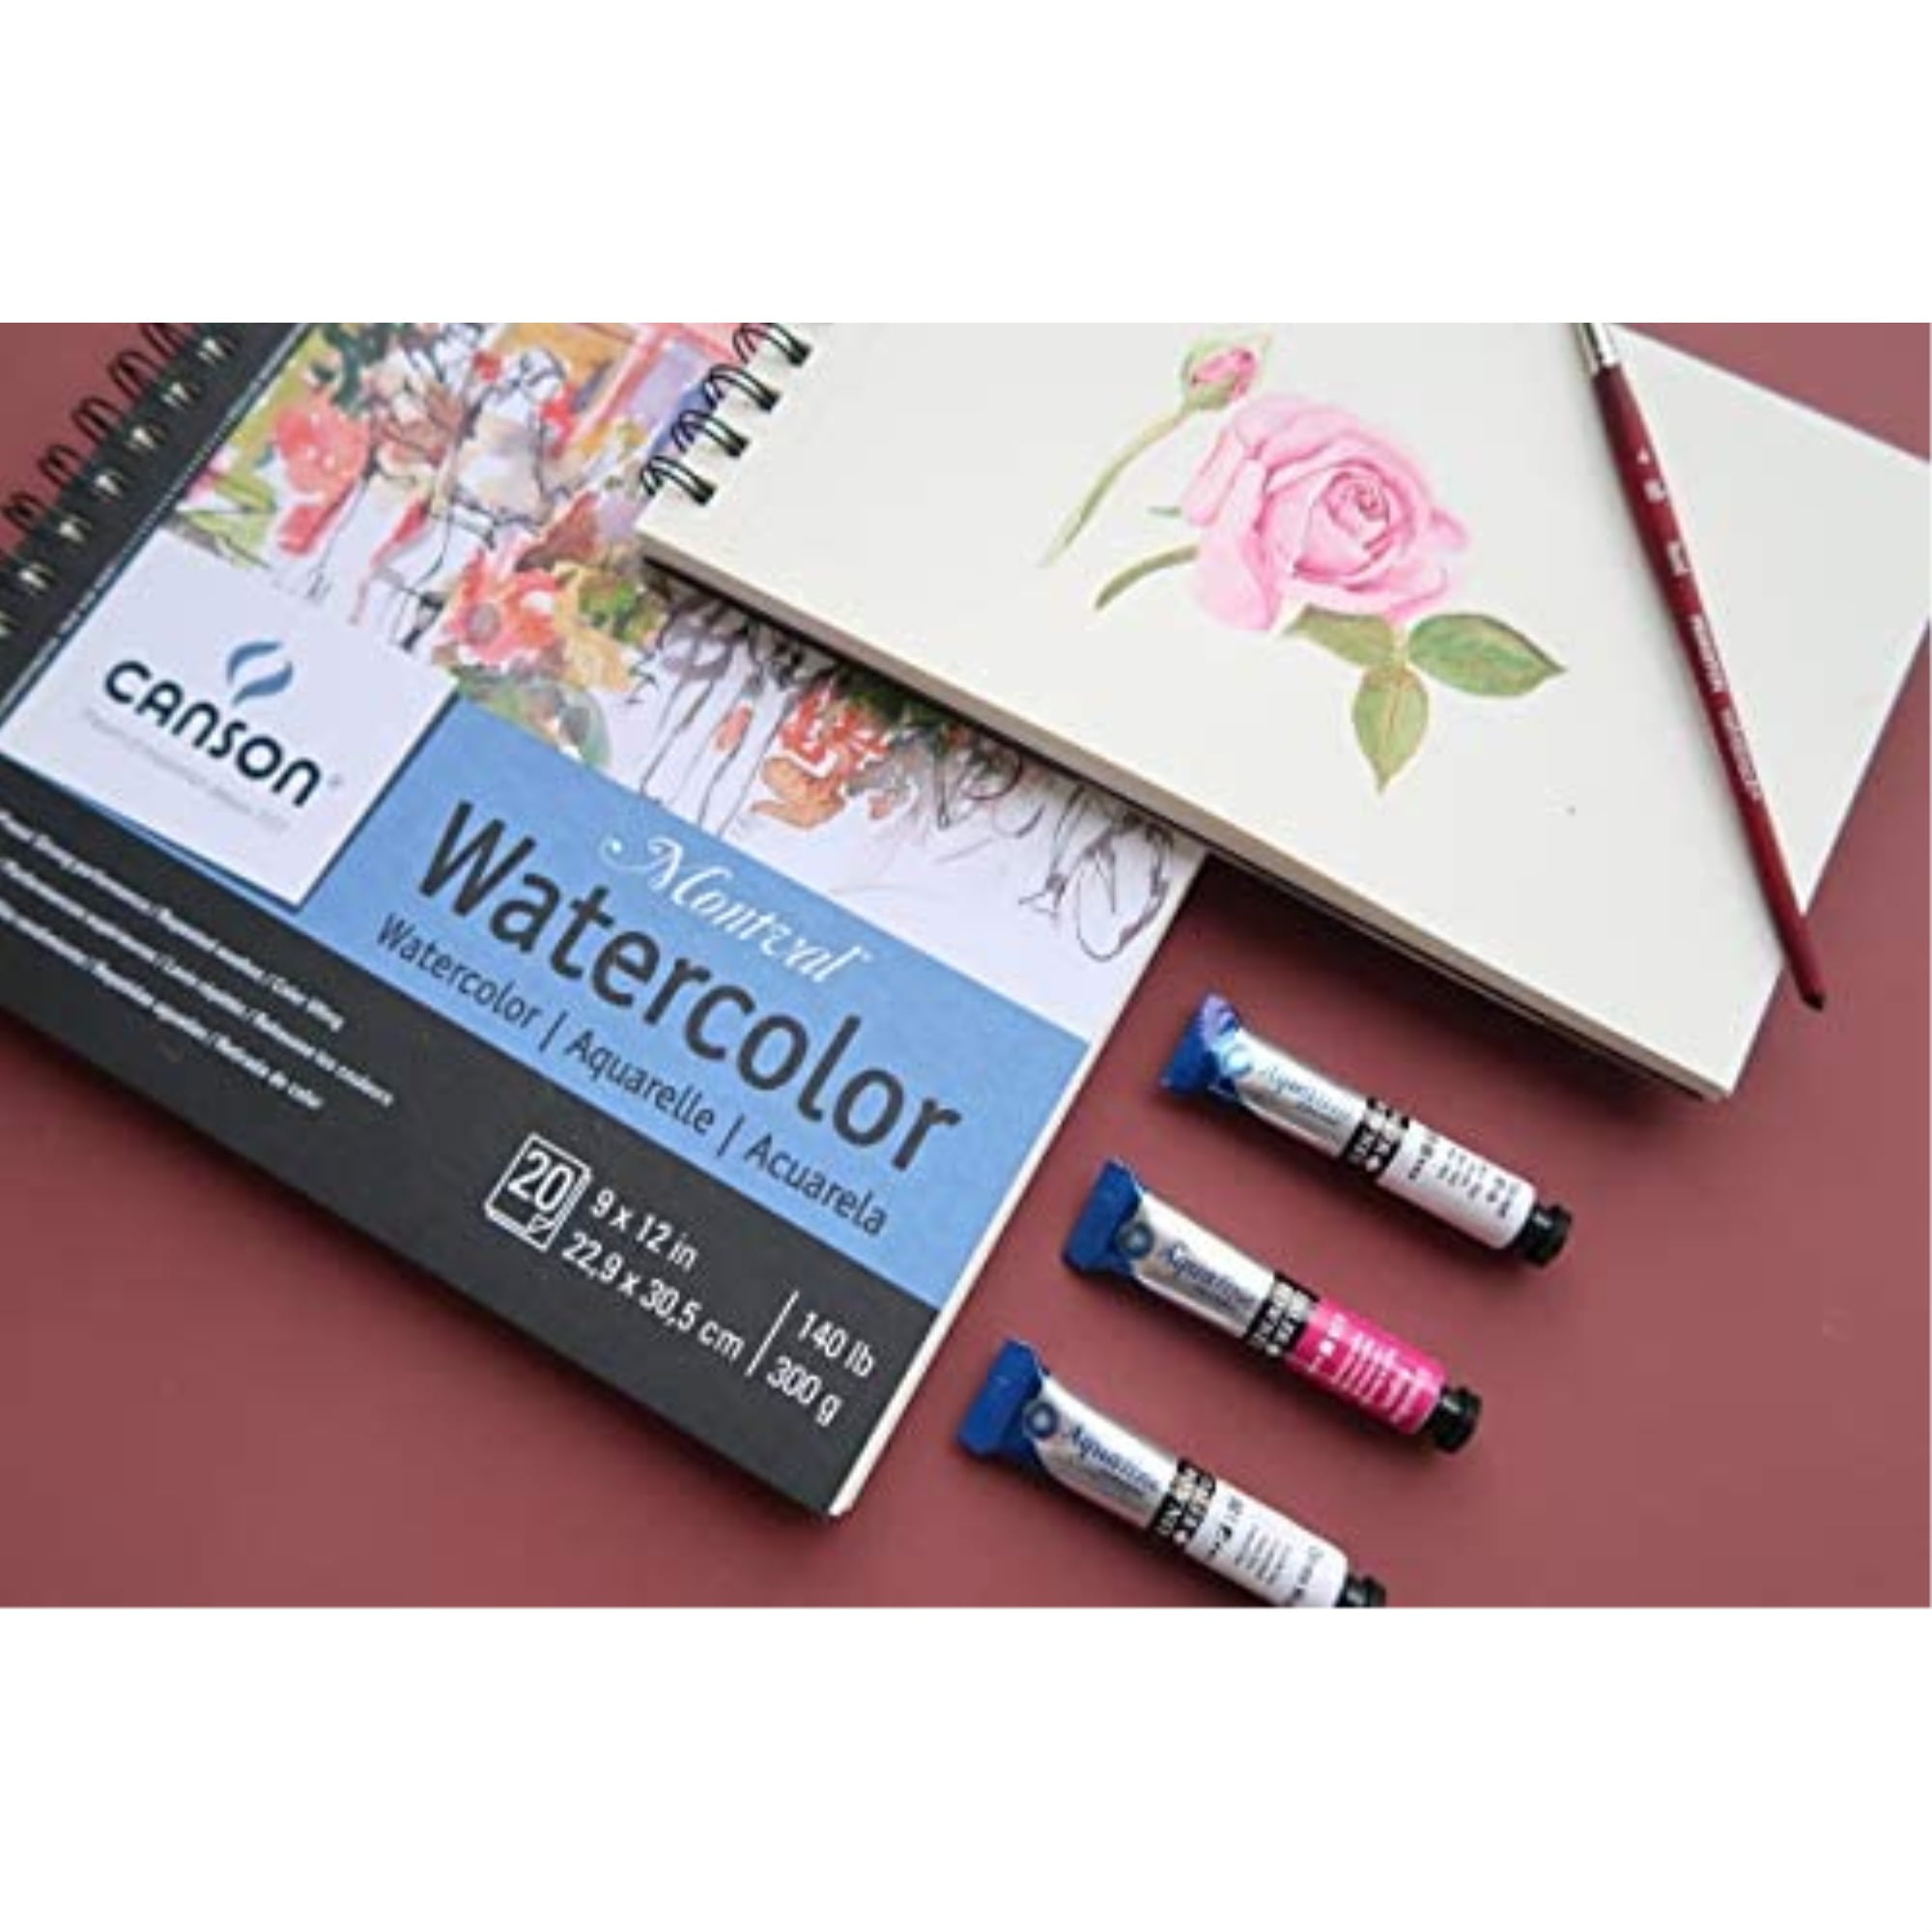 Watercolor Pads, 5-1/2 x 8-1/2, Pack of 2